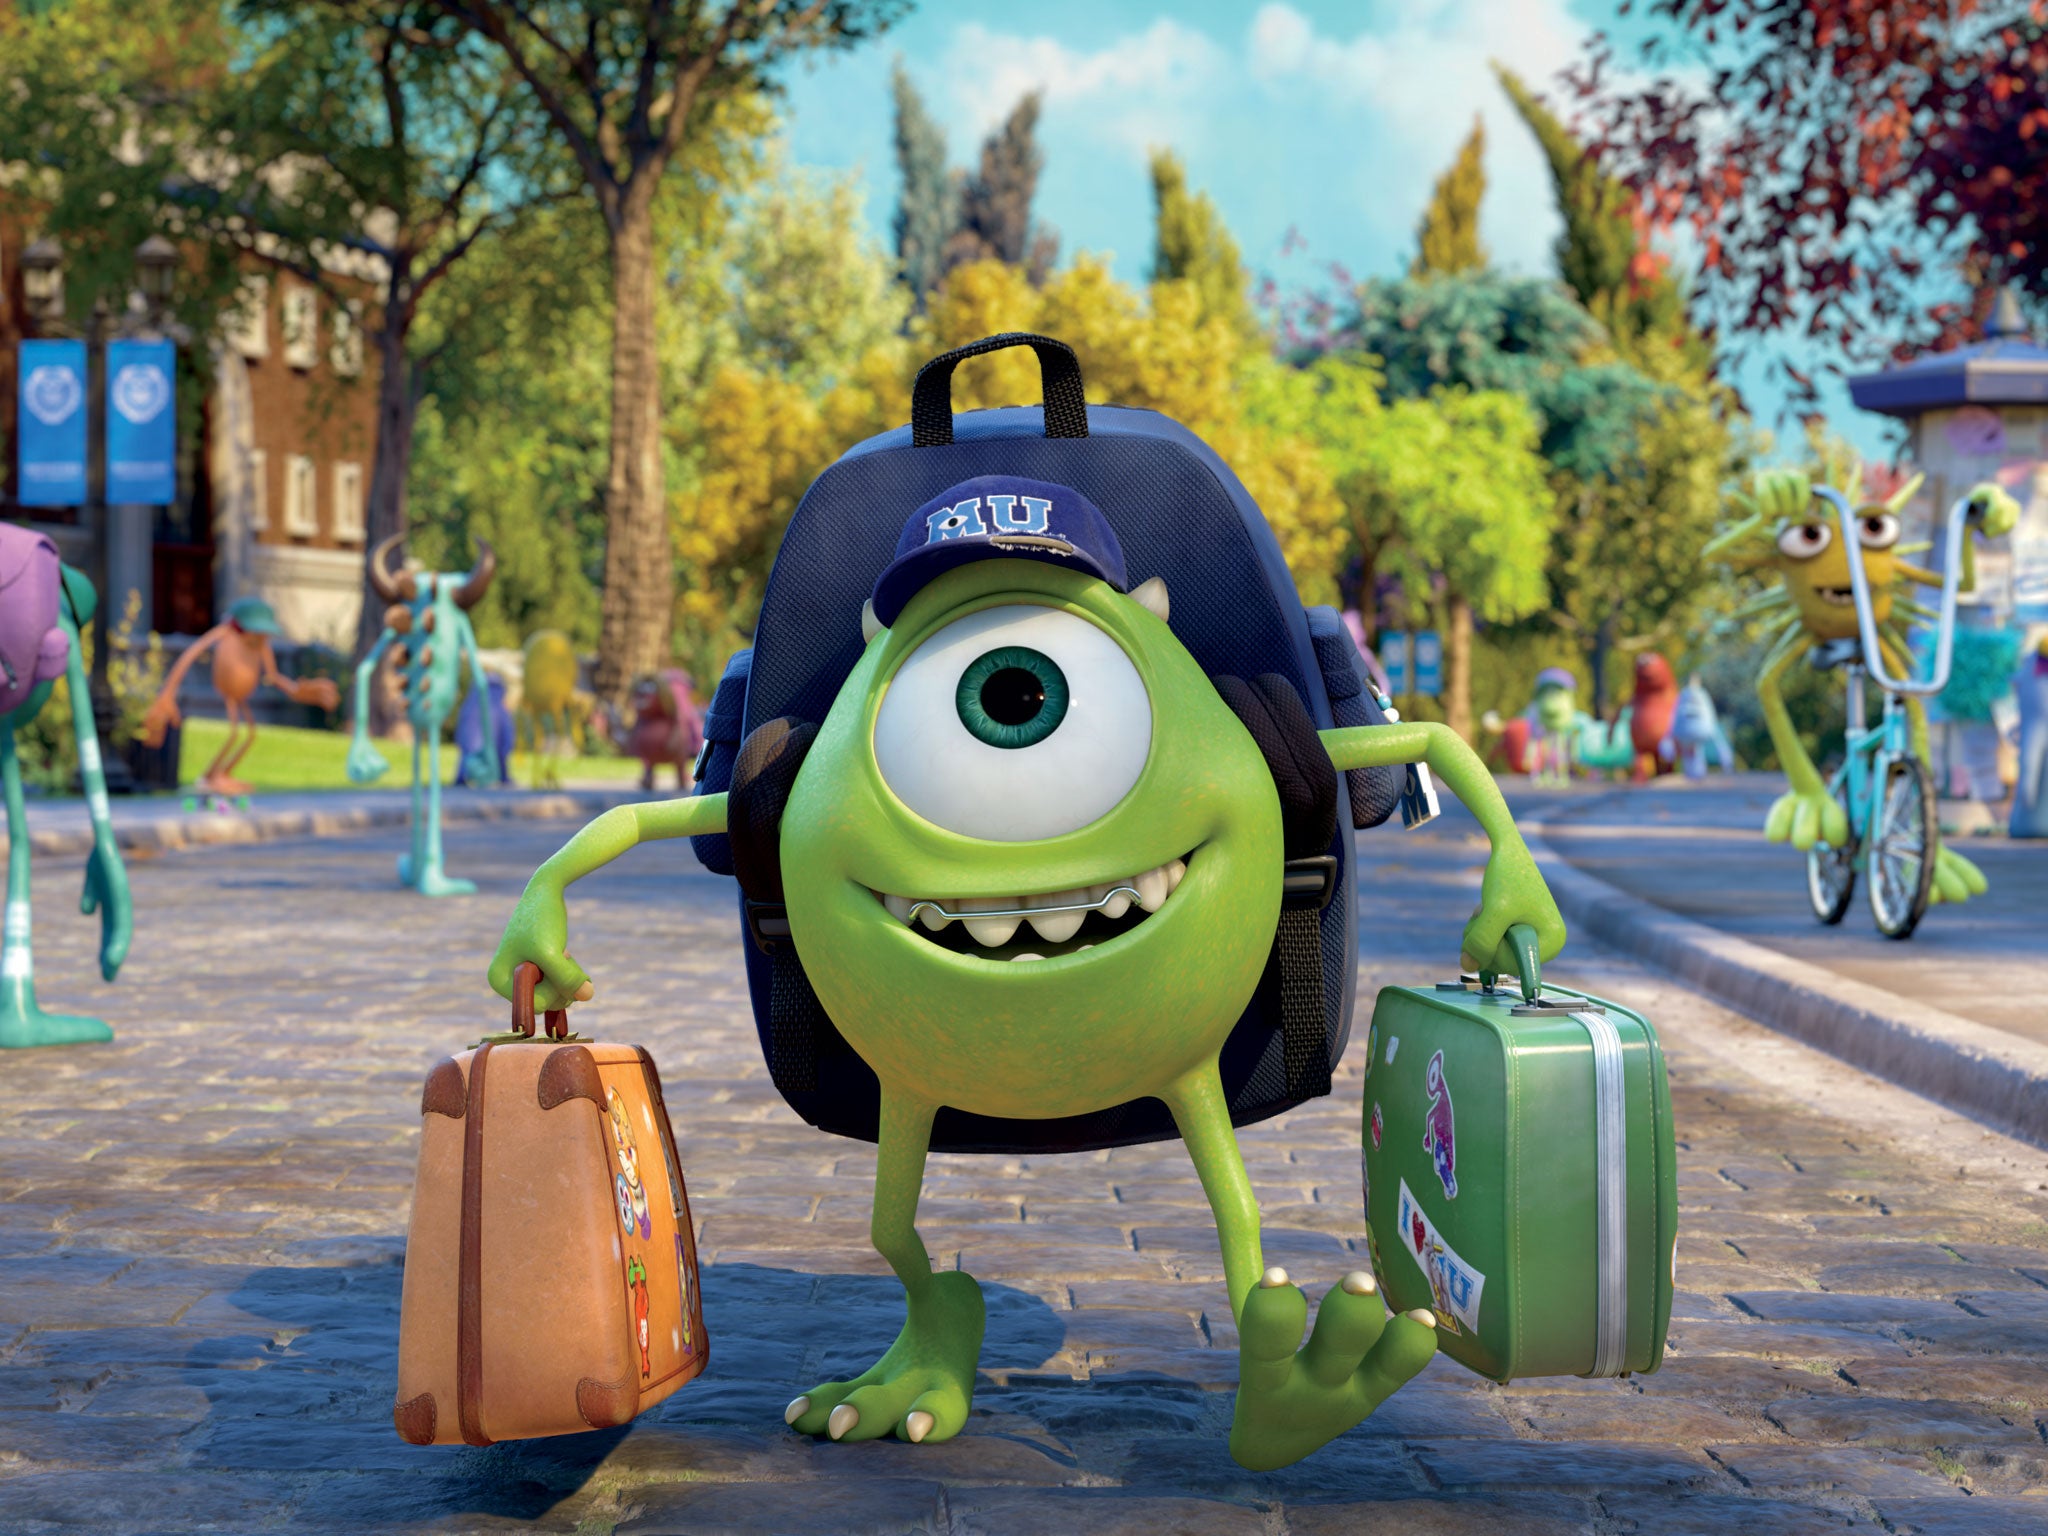 Mike Wazowski heads to Monsters University, surely one of the best fictional education institutions